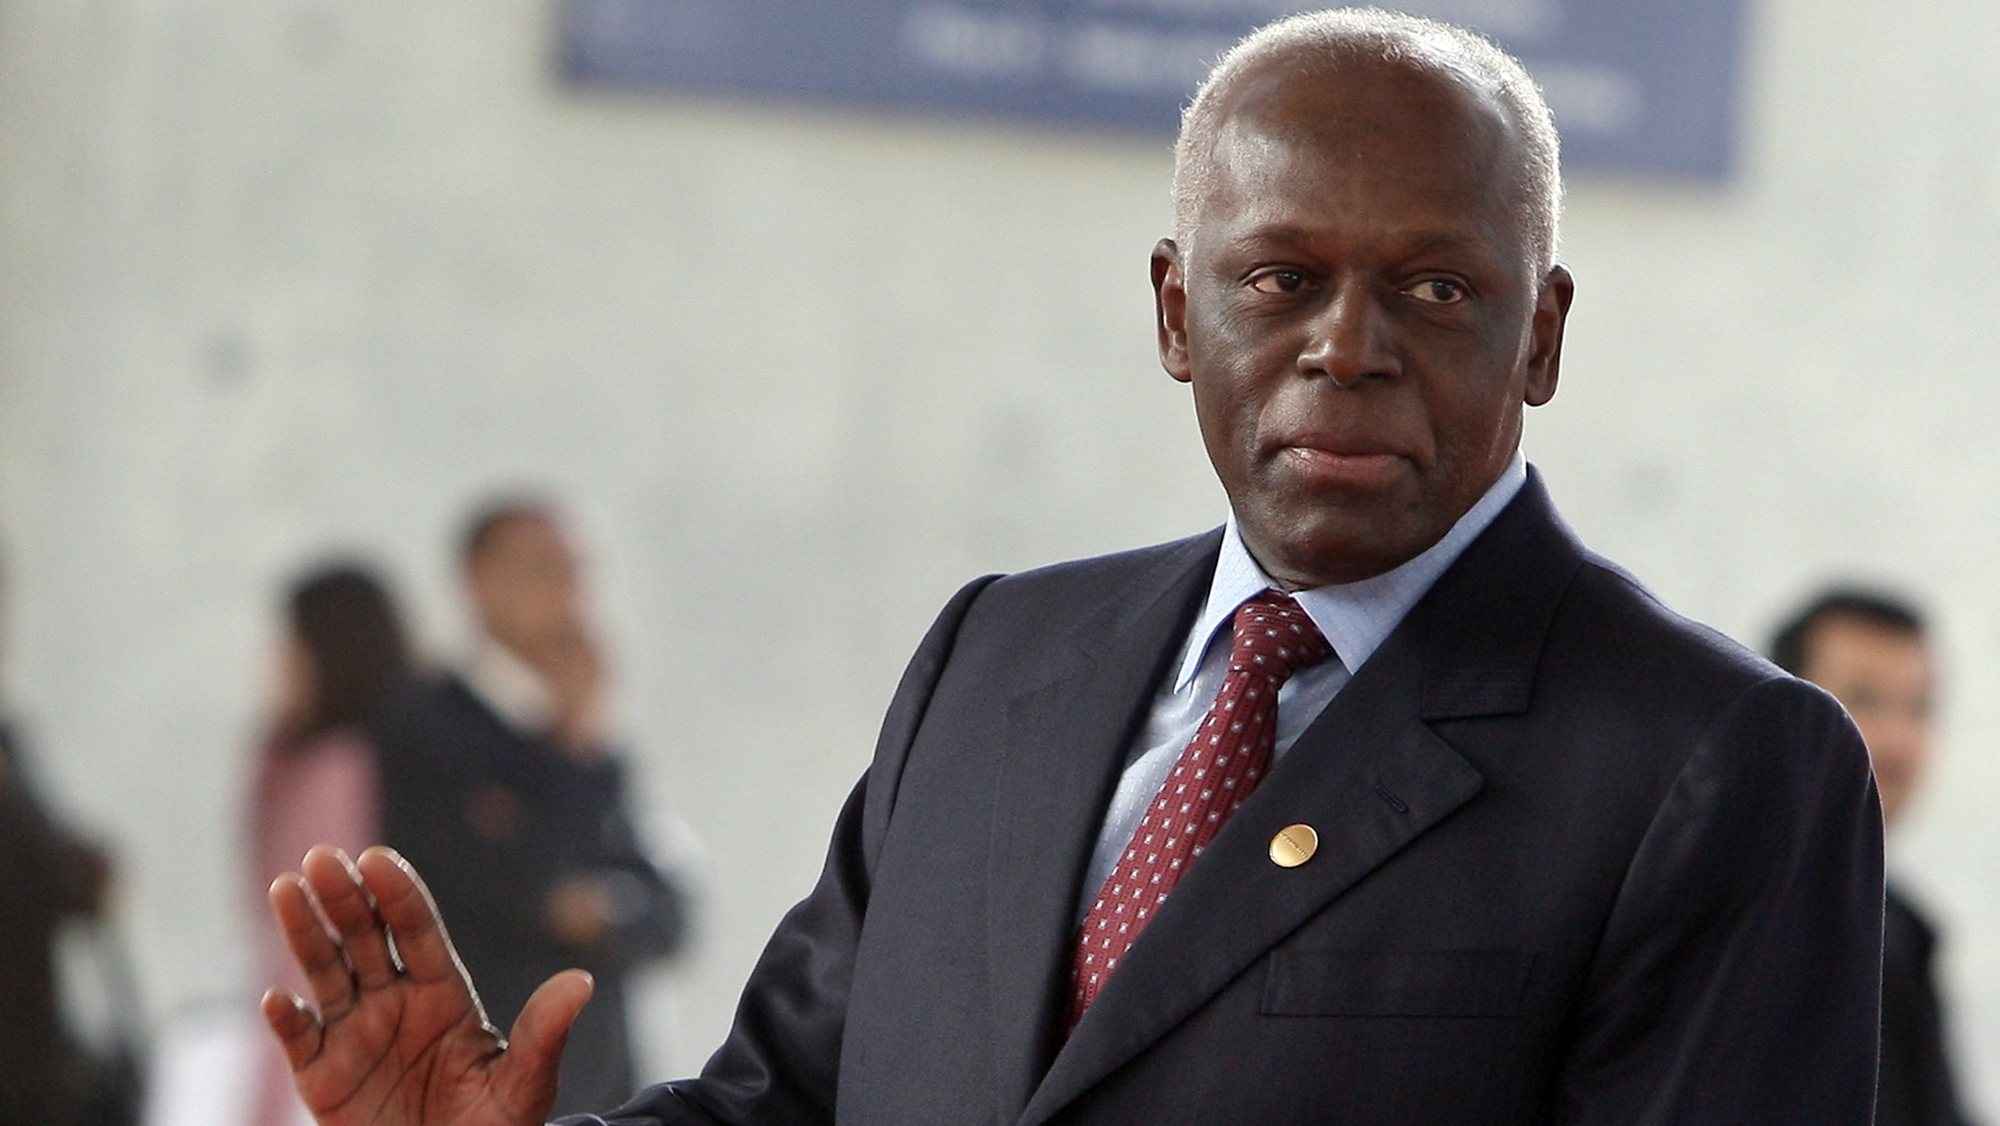 epa10059048 (FILE) - President of Angola, Jose Eduardo dos Santos, reacts during an event in Luanda, Angola, 08 December 2007 (reissued 08 July 2022). Former President of Angola Jose Eduardo dos Santos died on 08 July 2022 aged 79 in Barcelona, Spain. He had served as Angolan head of state from 1979 to 2017.  EPA/TIAGO PETINGA